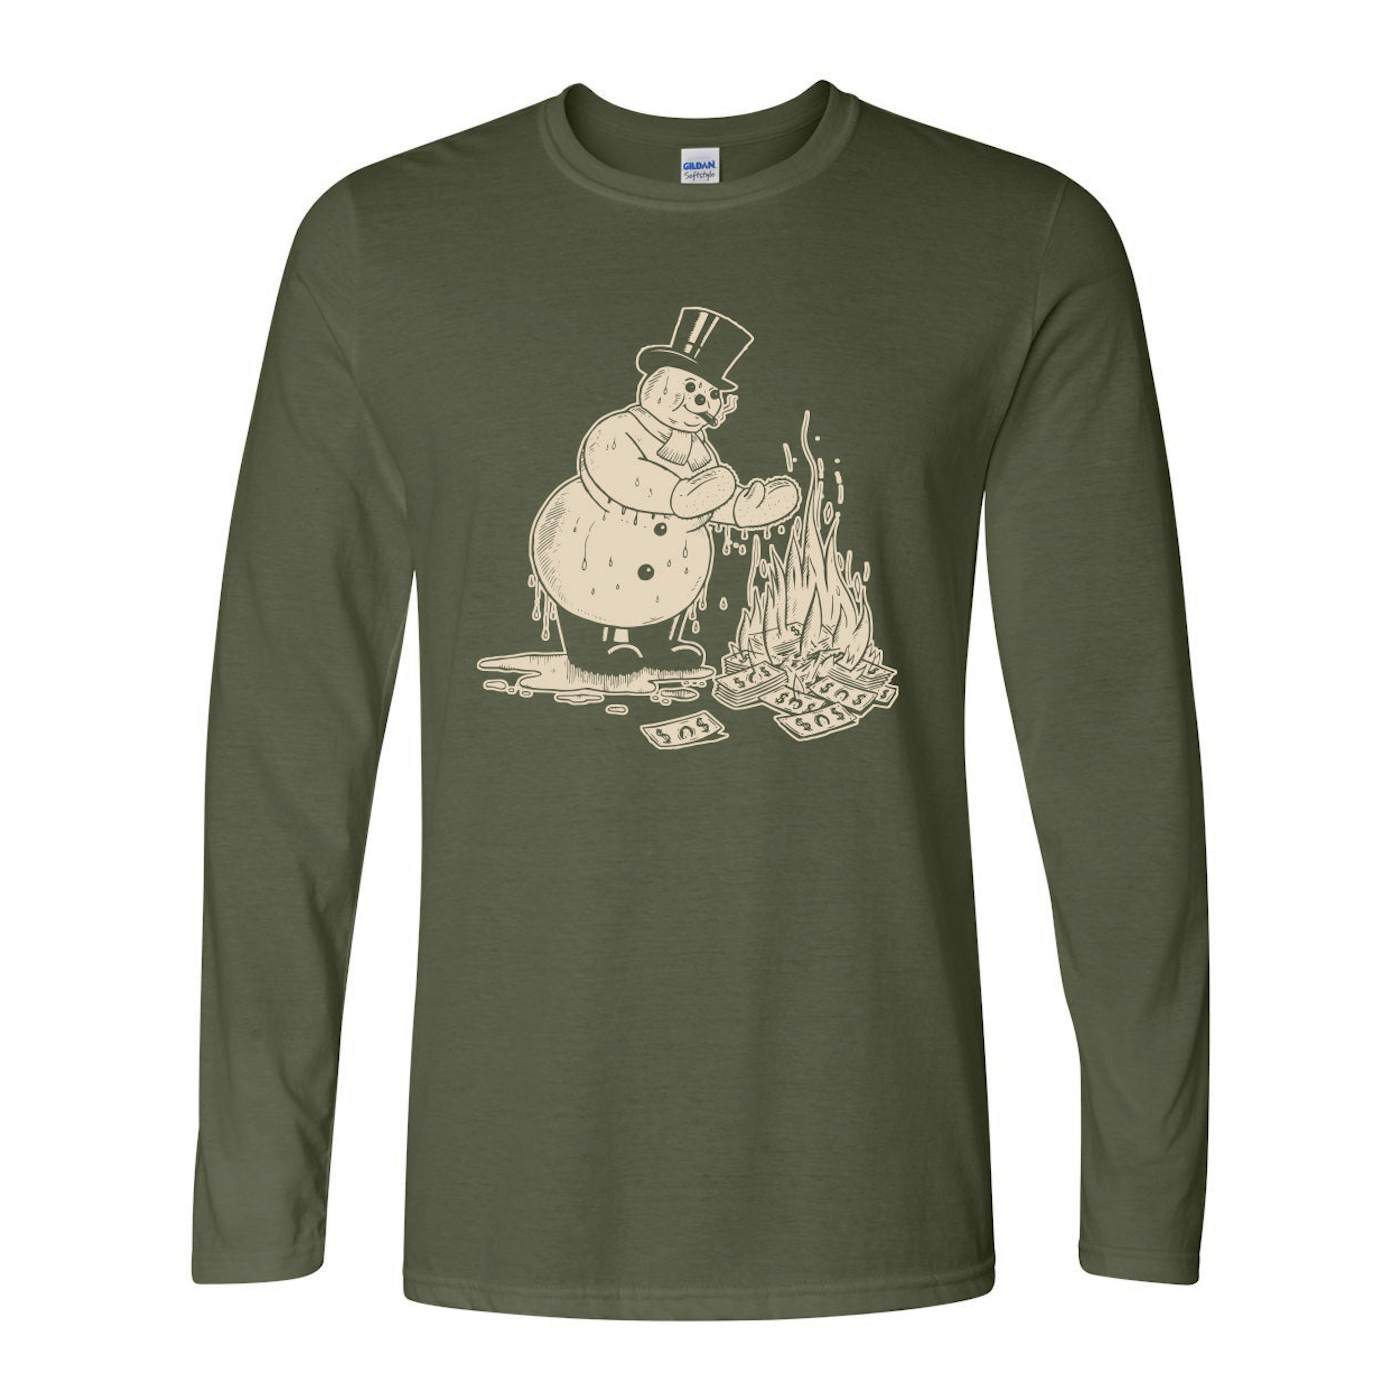 They Might Be Giants Snowman Long Sleeve T-Shirt (Unisex)